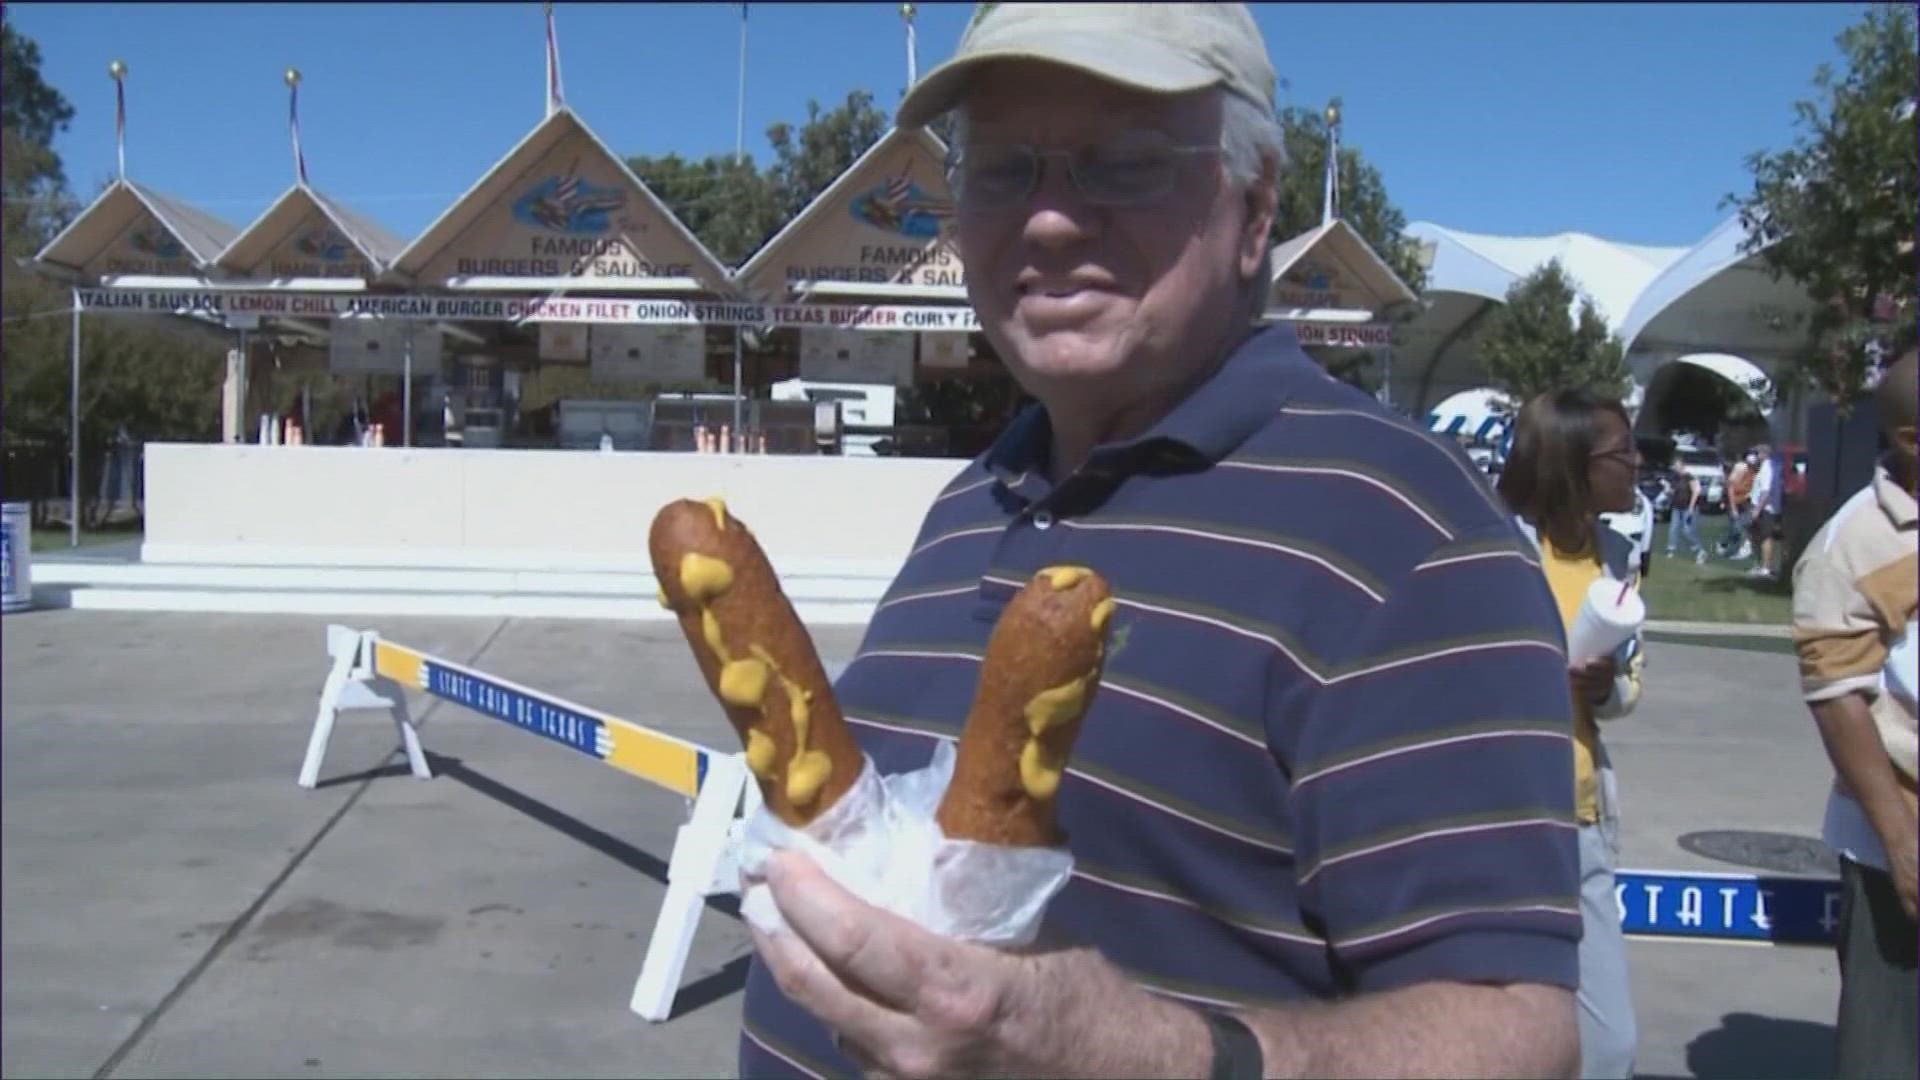 We all know fried food is bad for you. But when you go to the Texas State Fair, it's hard to stay away.